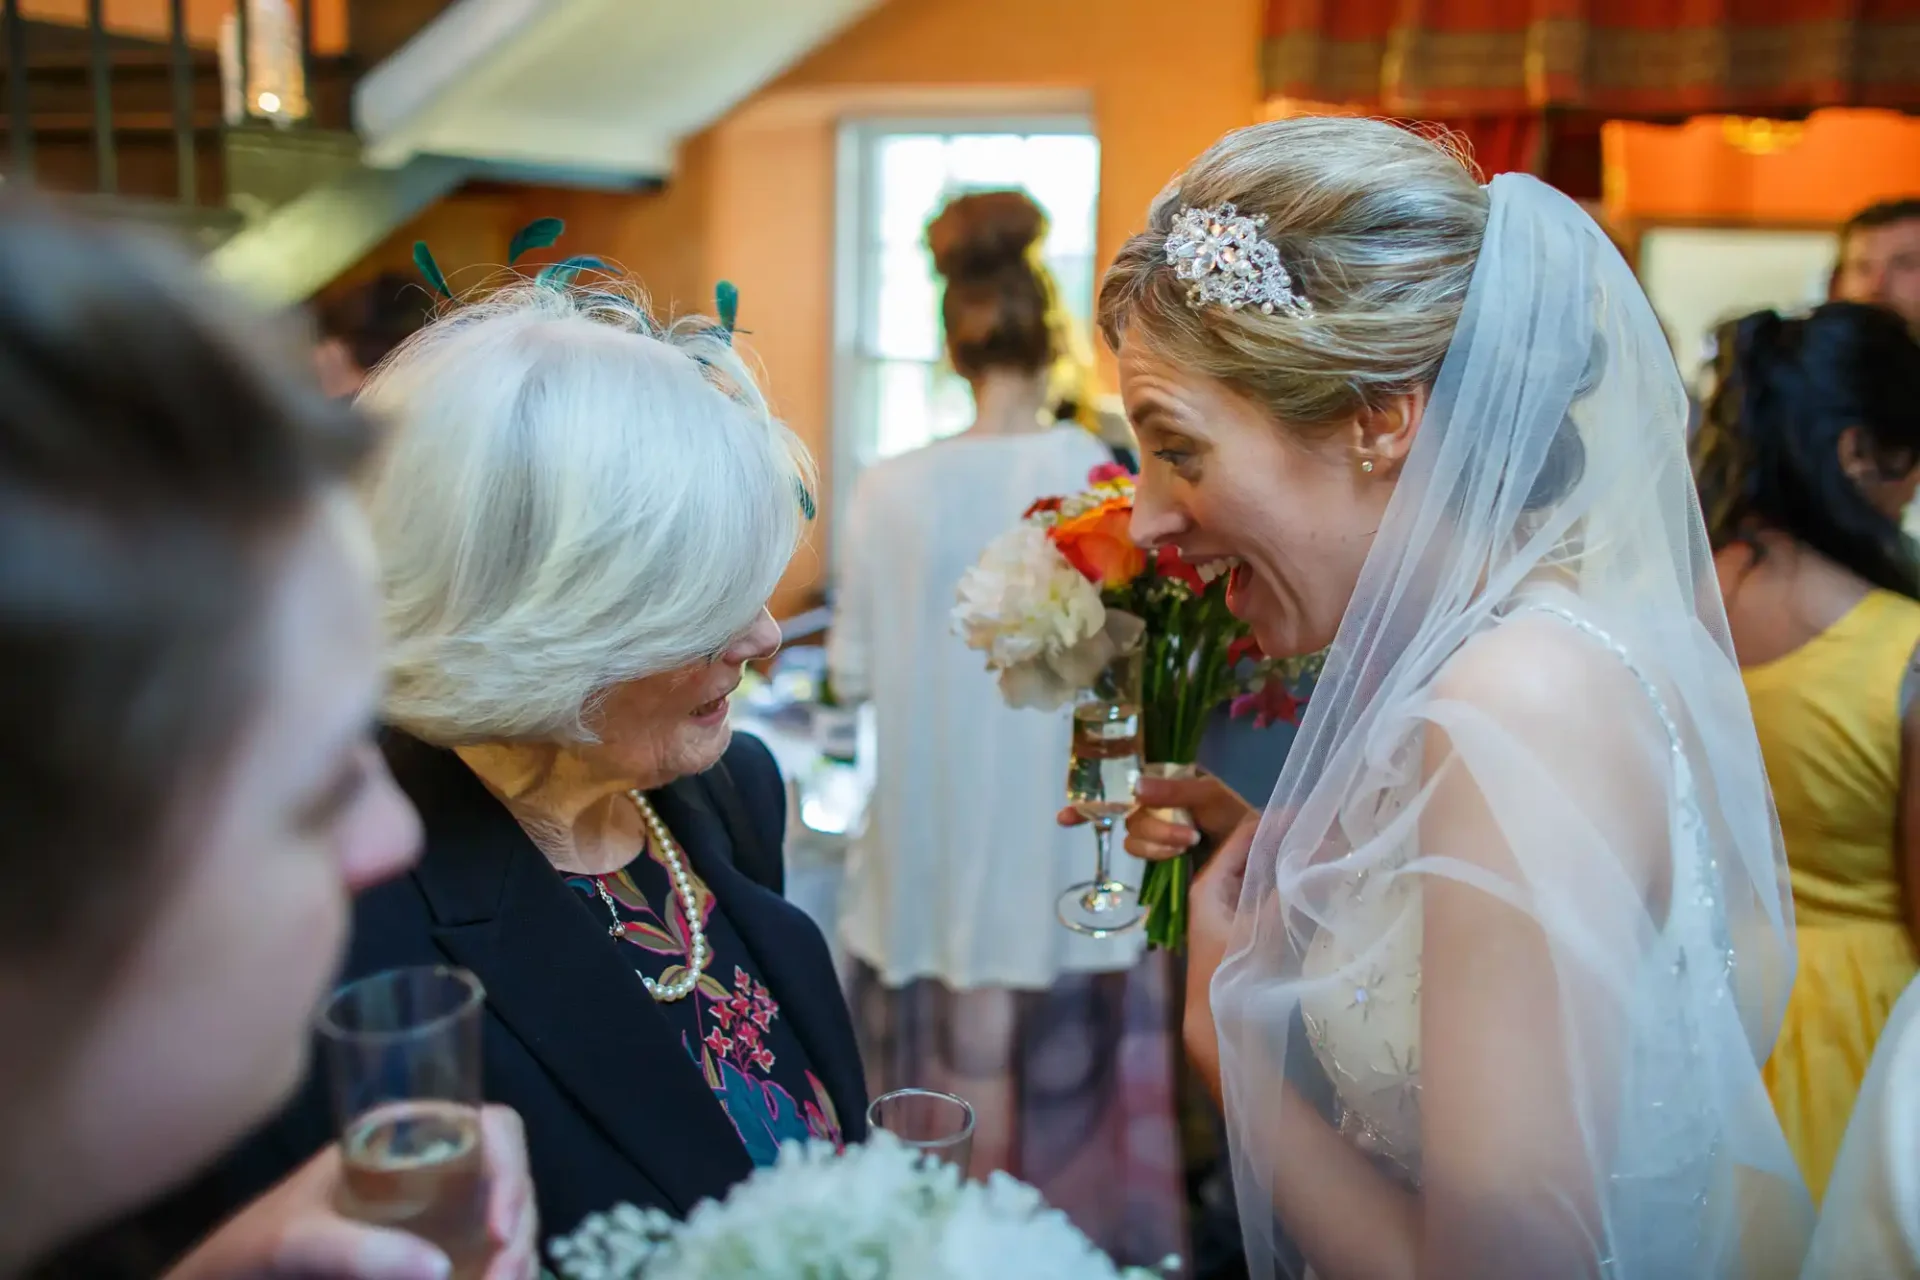 A bride in a veil smiles broadly while talking to an elderly woman at a wedding reception, each holding a glass.